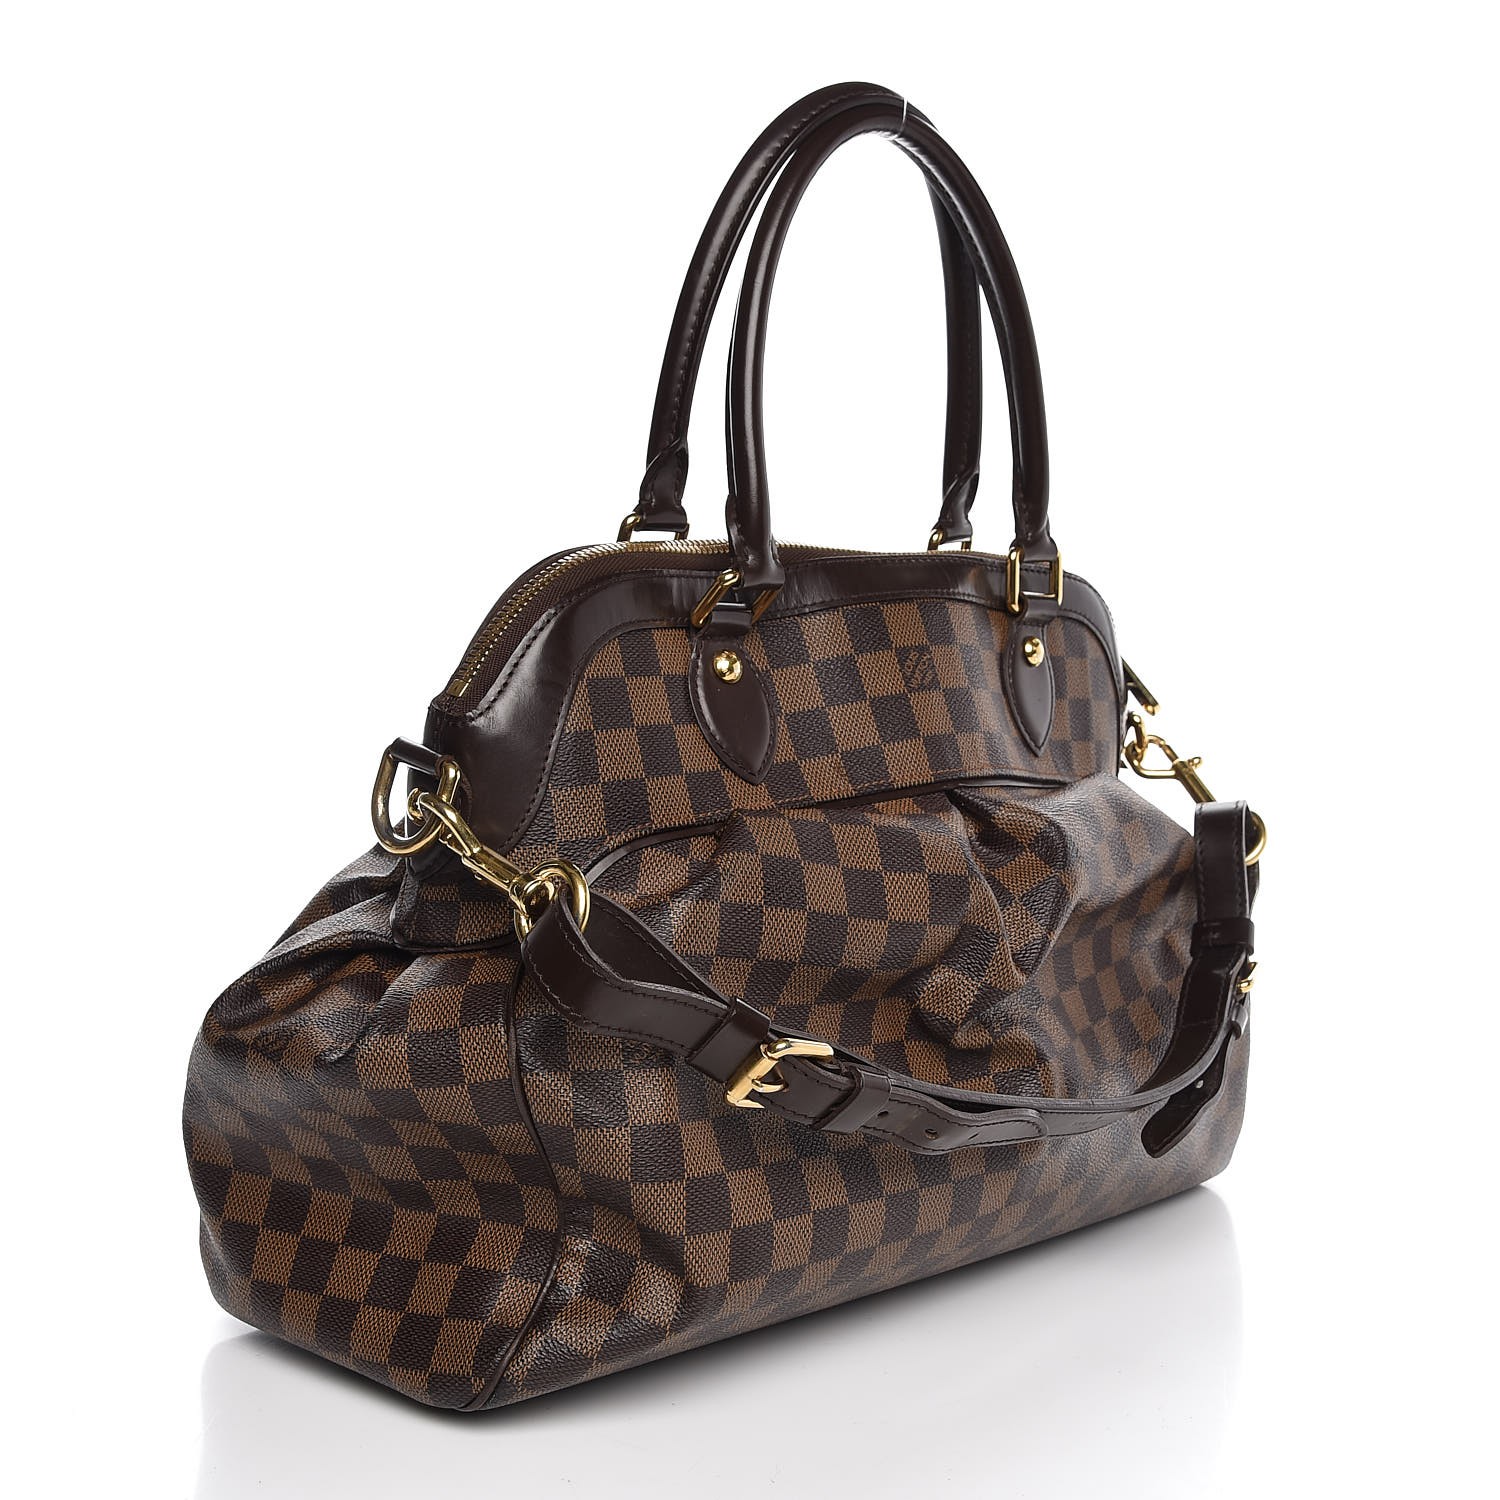 Tysons Galleria - Louis Vuitton, available for curbside pick-up